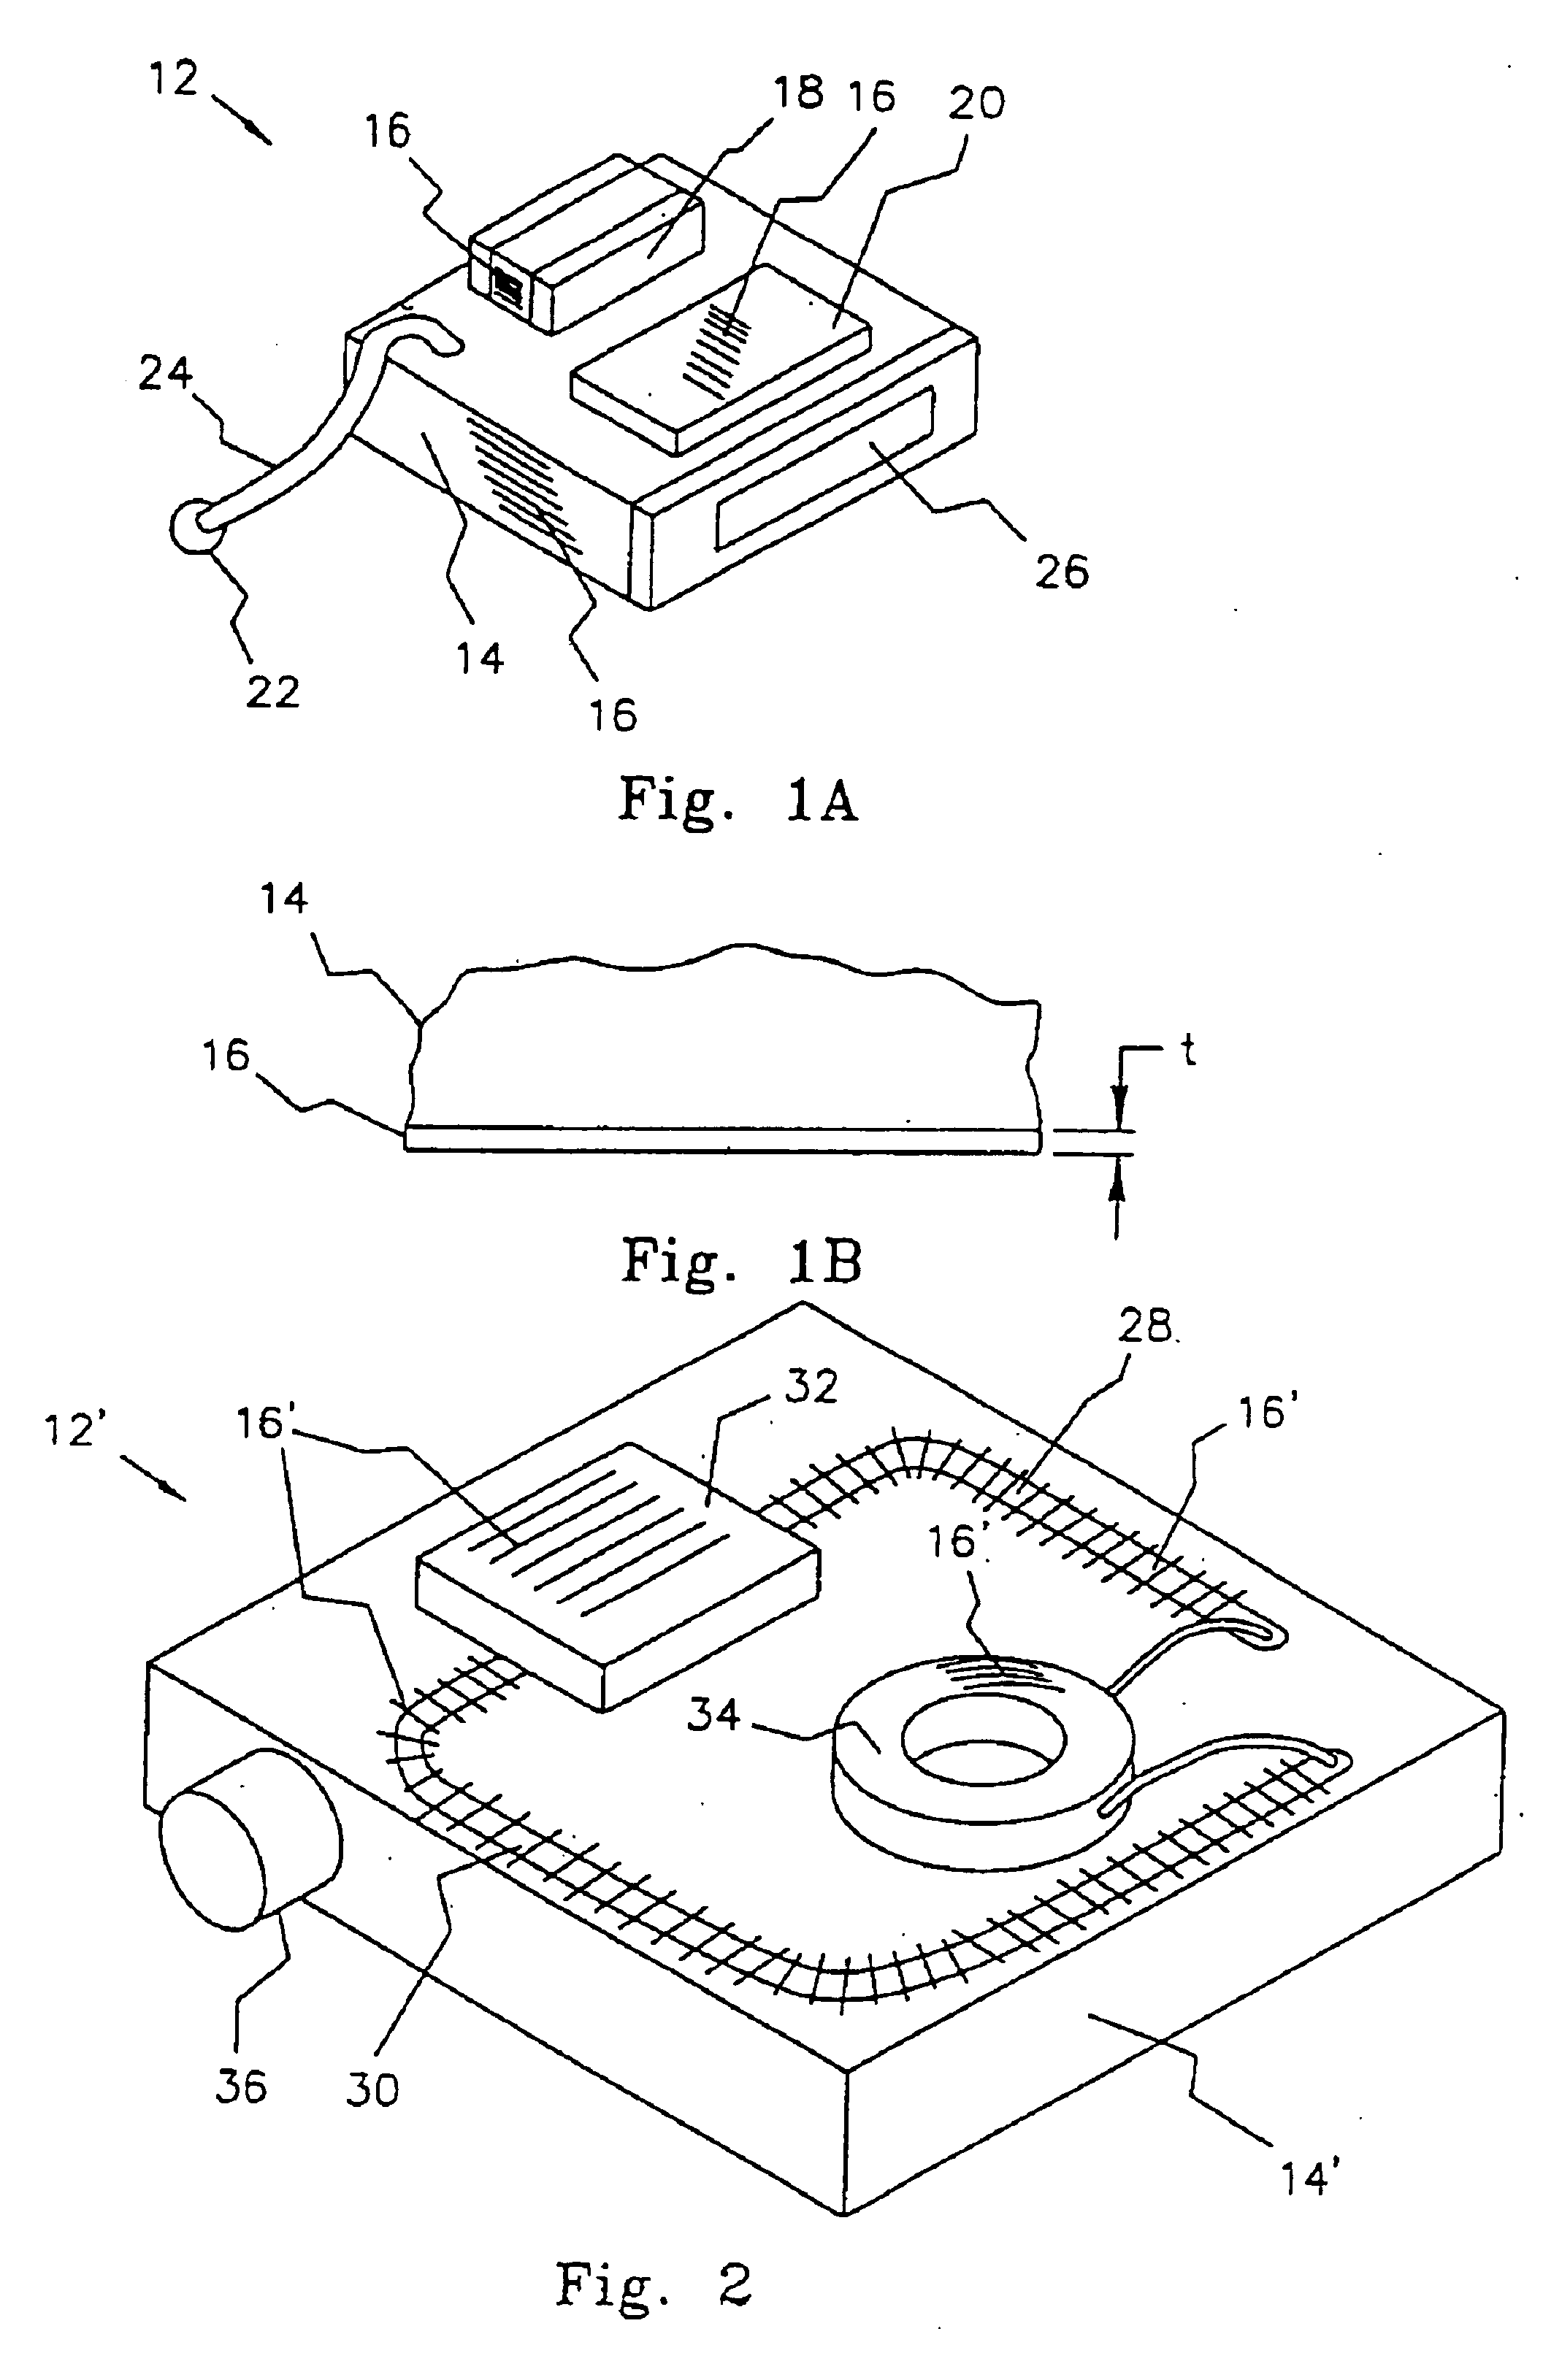 Alumina insulation for coating implantable components and other microminiature devices